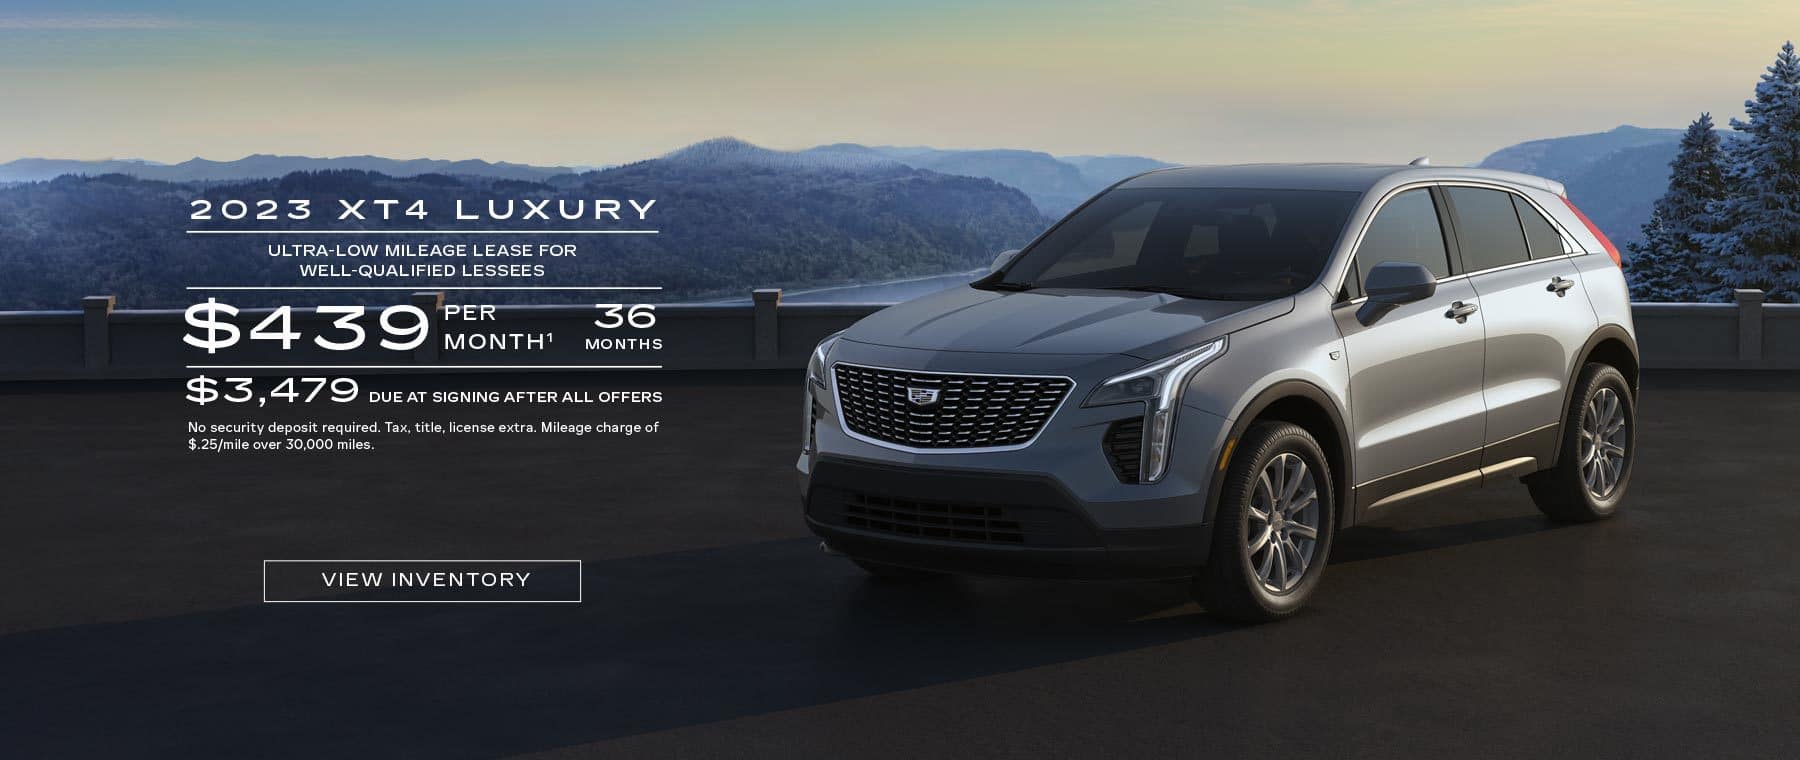 2023 XT4 Luxury. Ultra-low mileage lease for well-qualified lessees. $439 per month. 36 months. $3,479 due at signing after all offers.